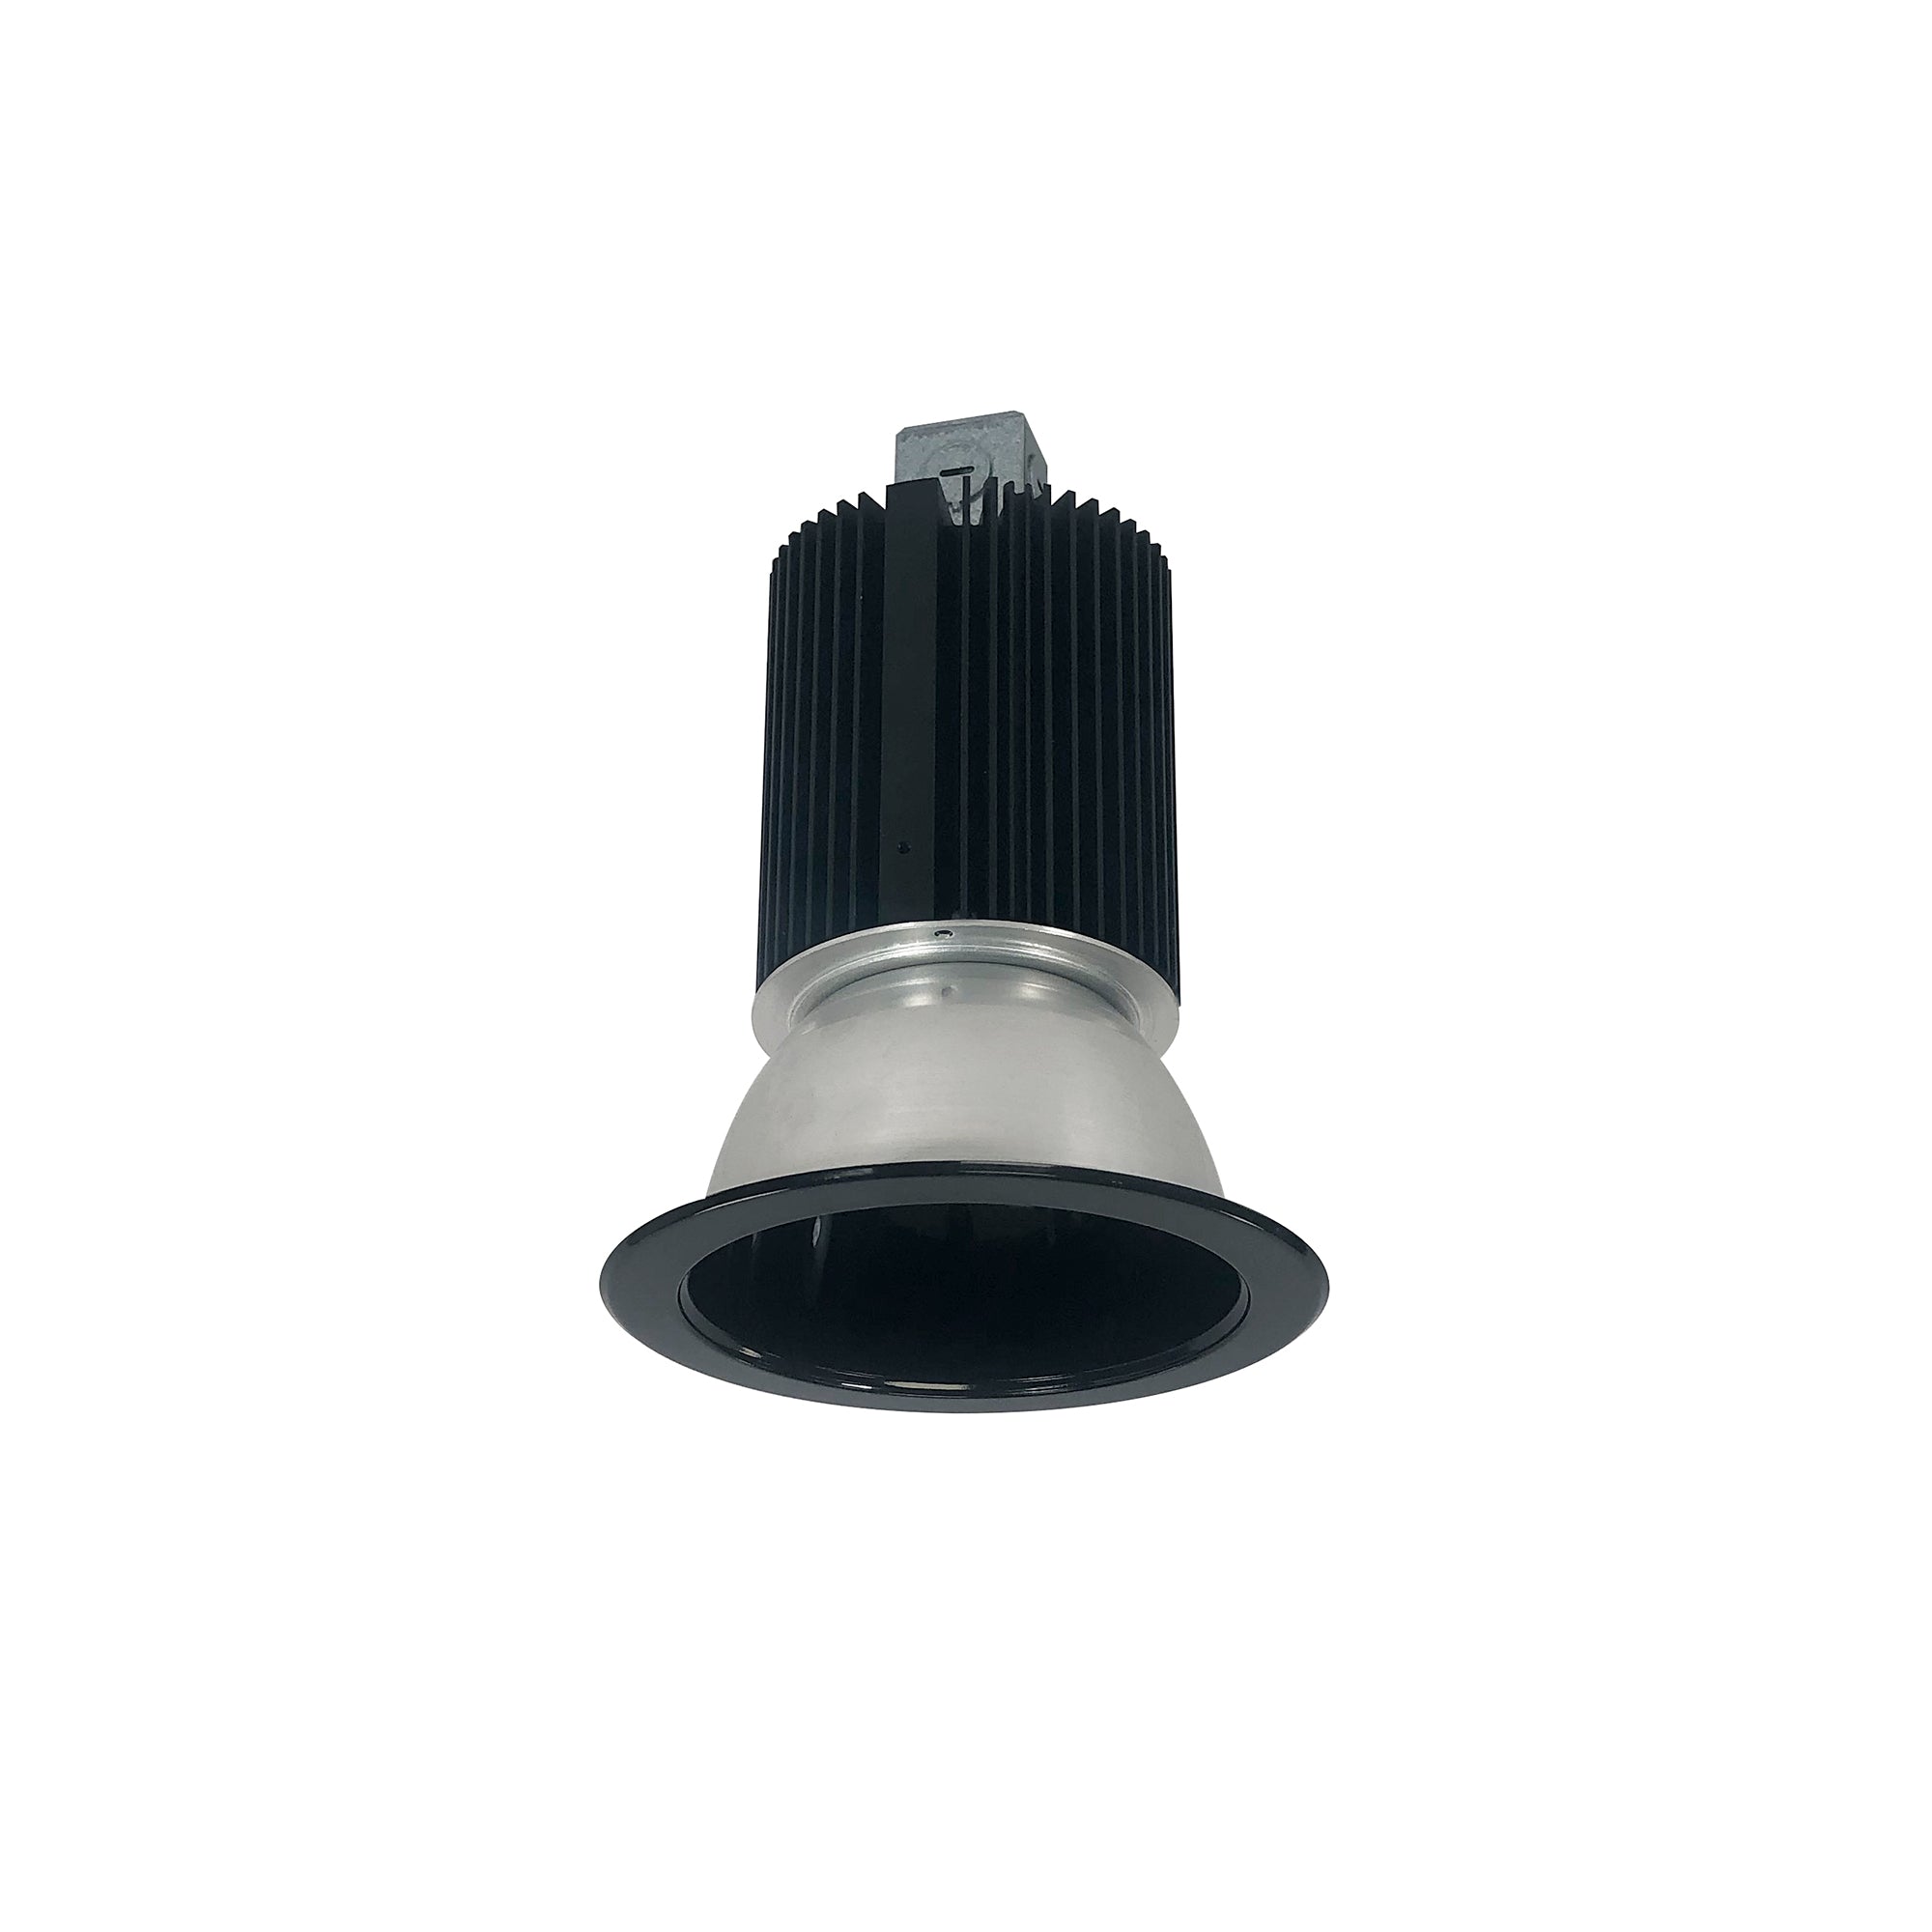 Nora Lighting NC2-431L1535SBSF - Recessed - 4 Inch Sapphire II Open Reflector, 1500lm, 3500K, 20-Degrees Spot, Black Self Flanged